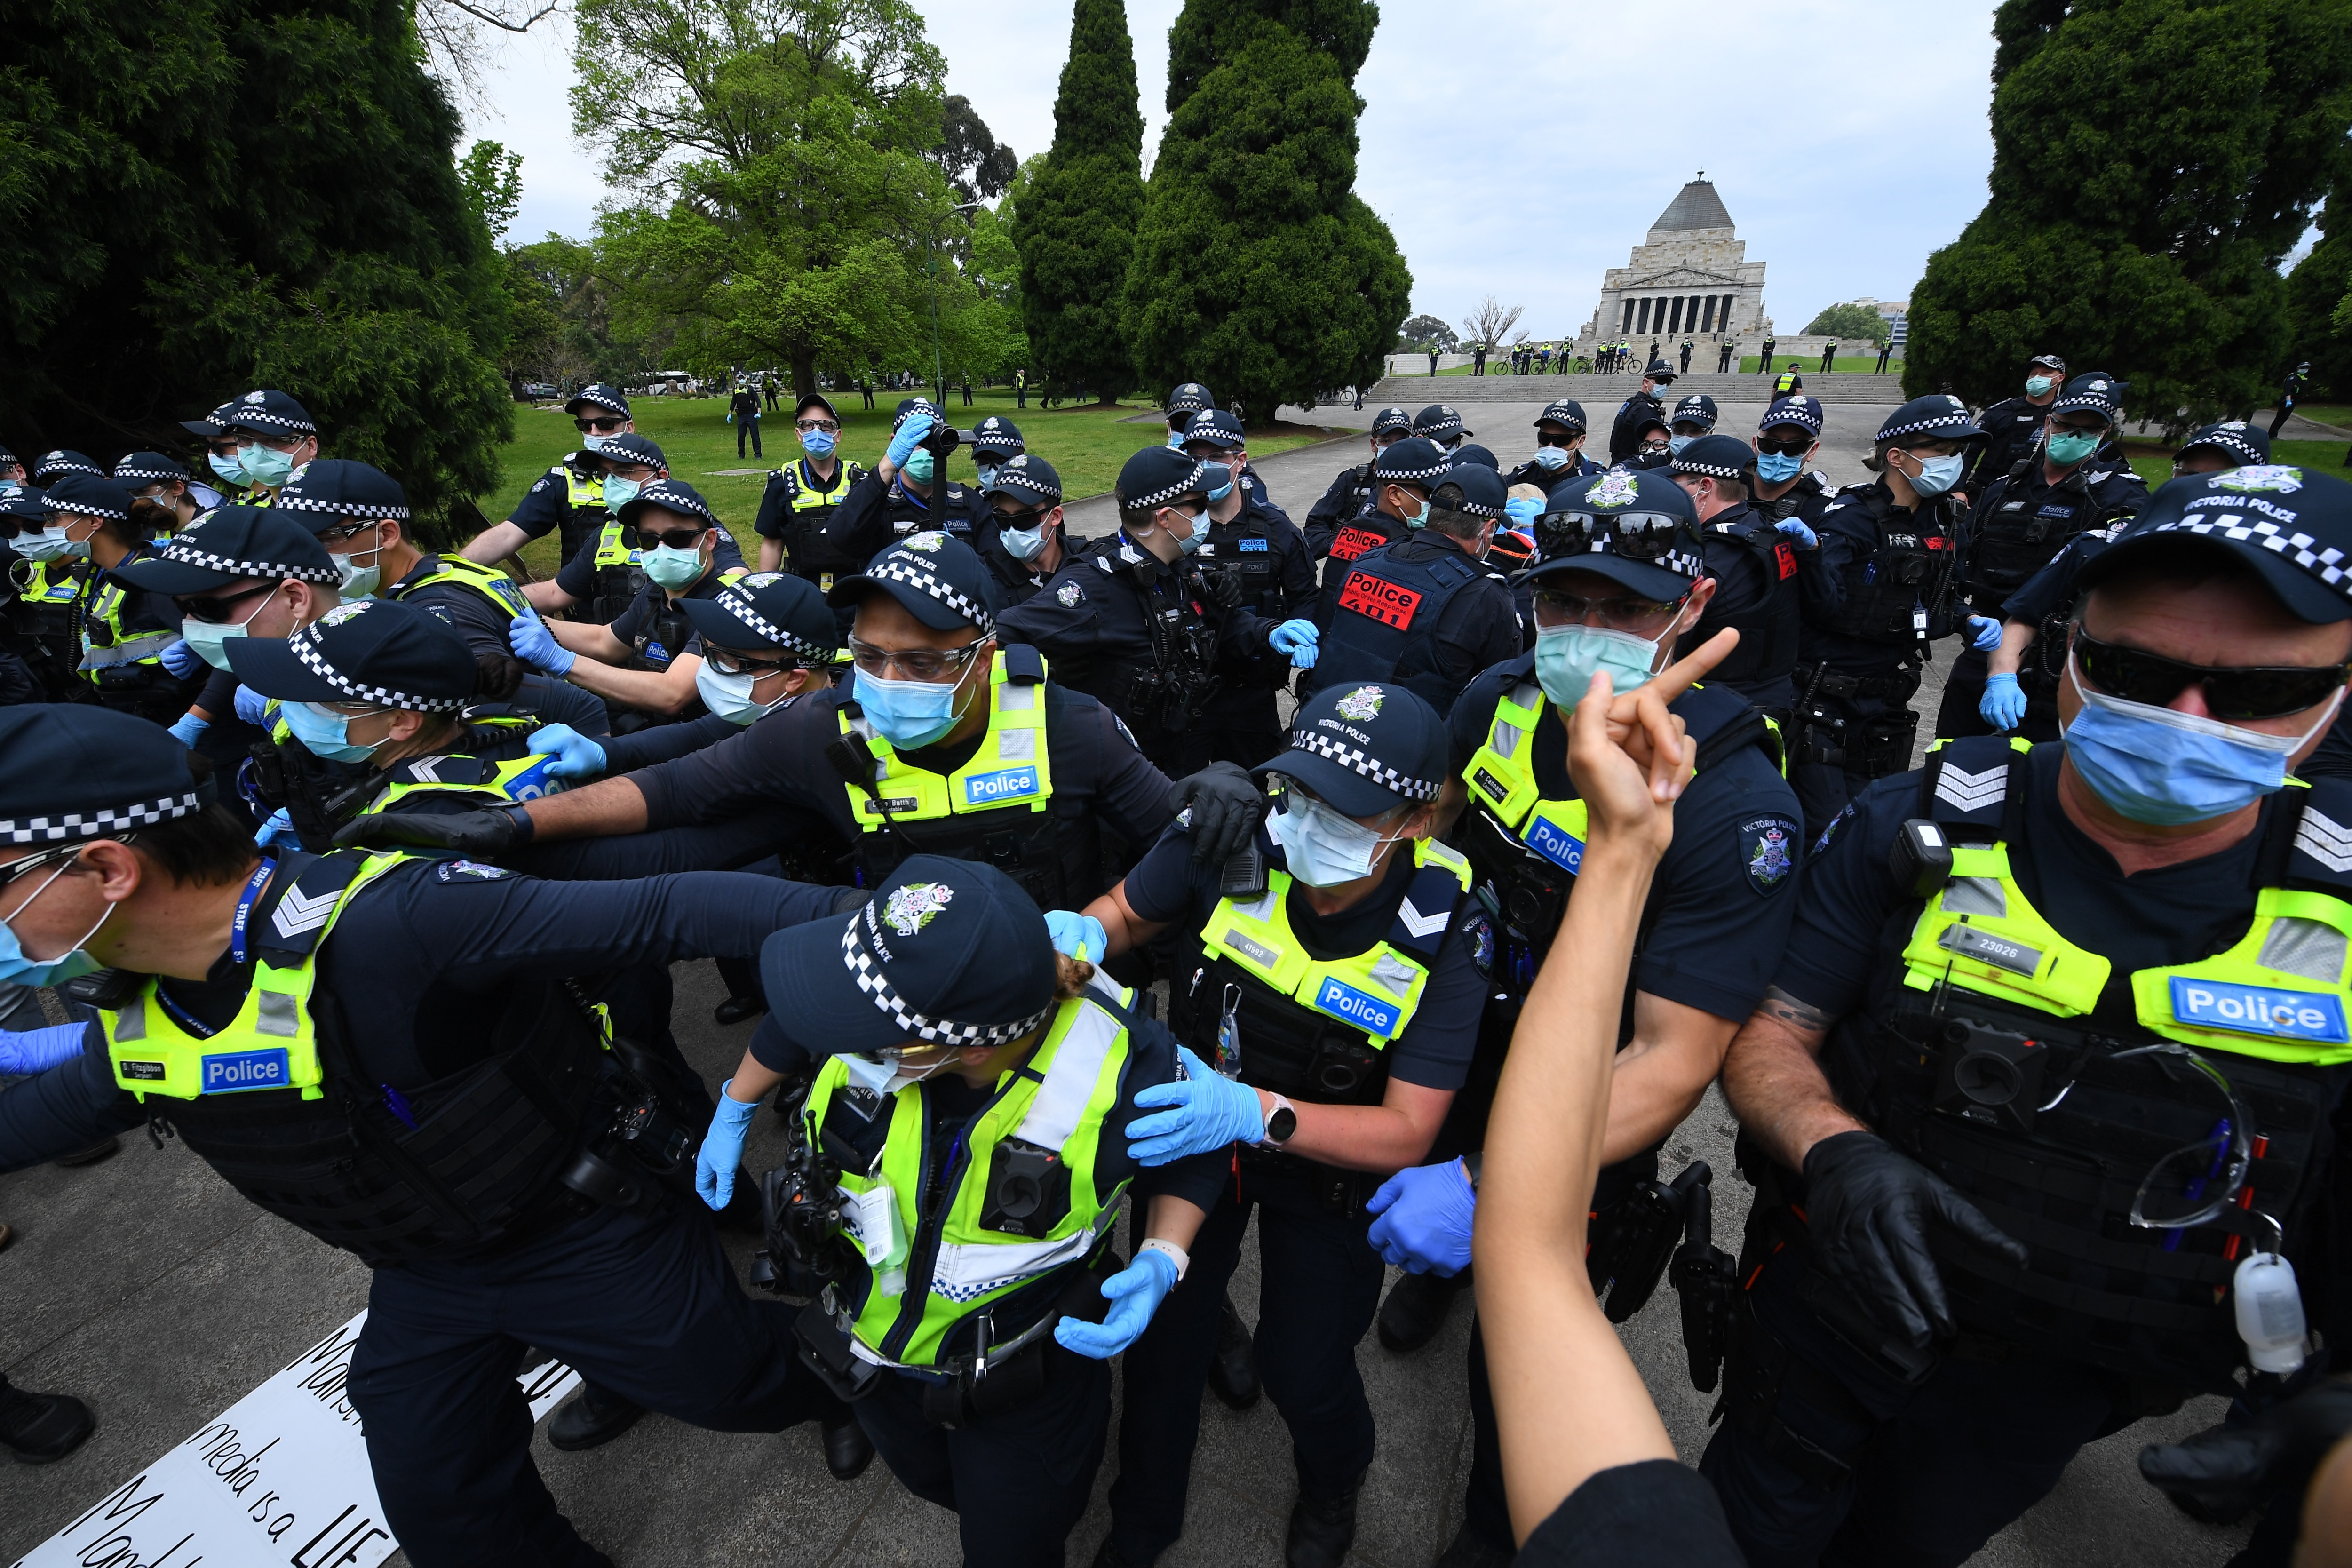 Police used pepper spray amid scuffles with demonstrators at an anti-lockdown protest in Melbourne.